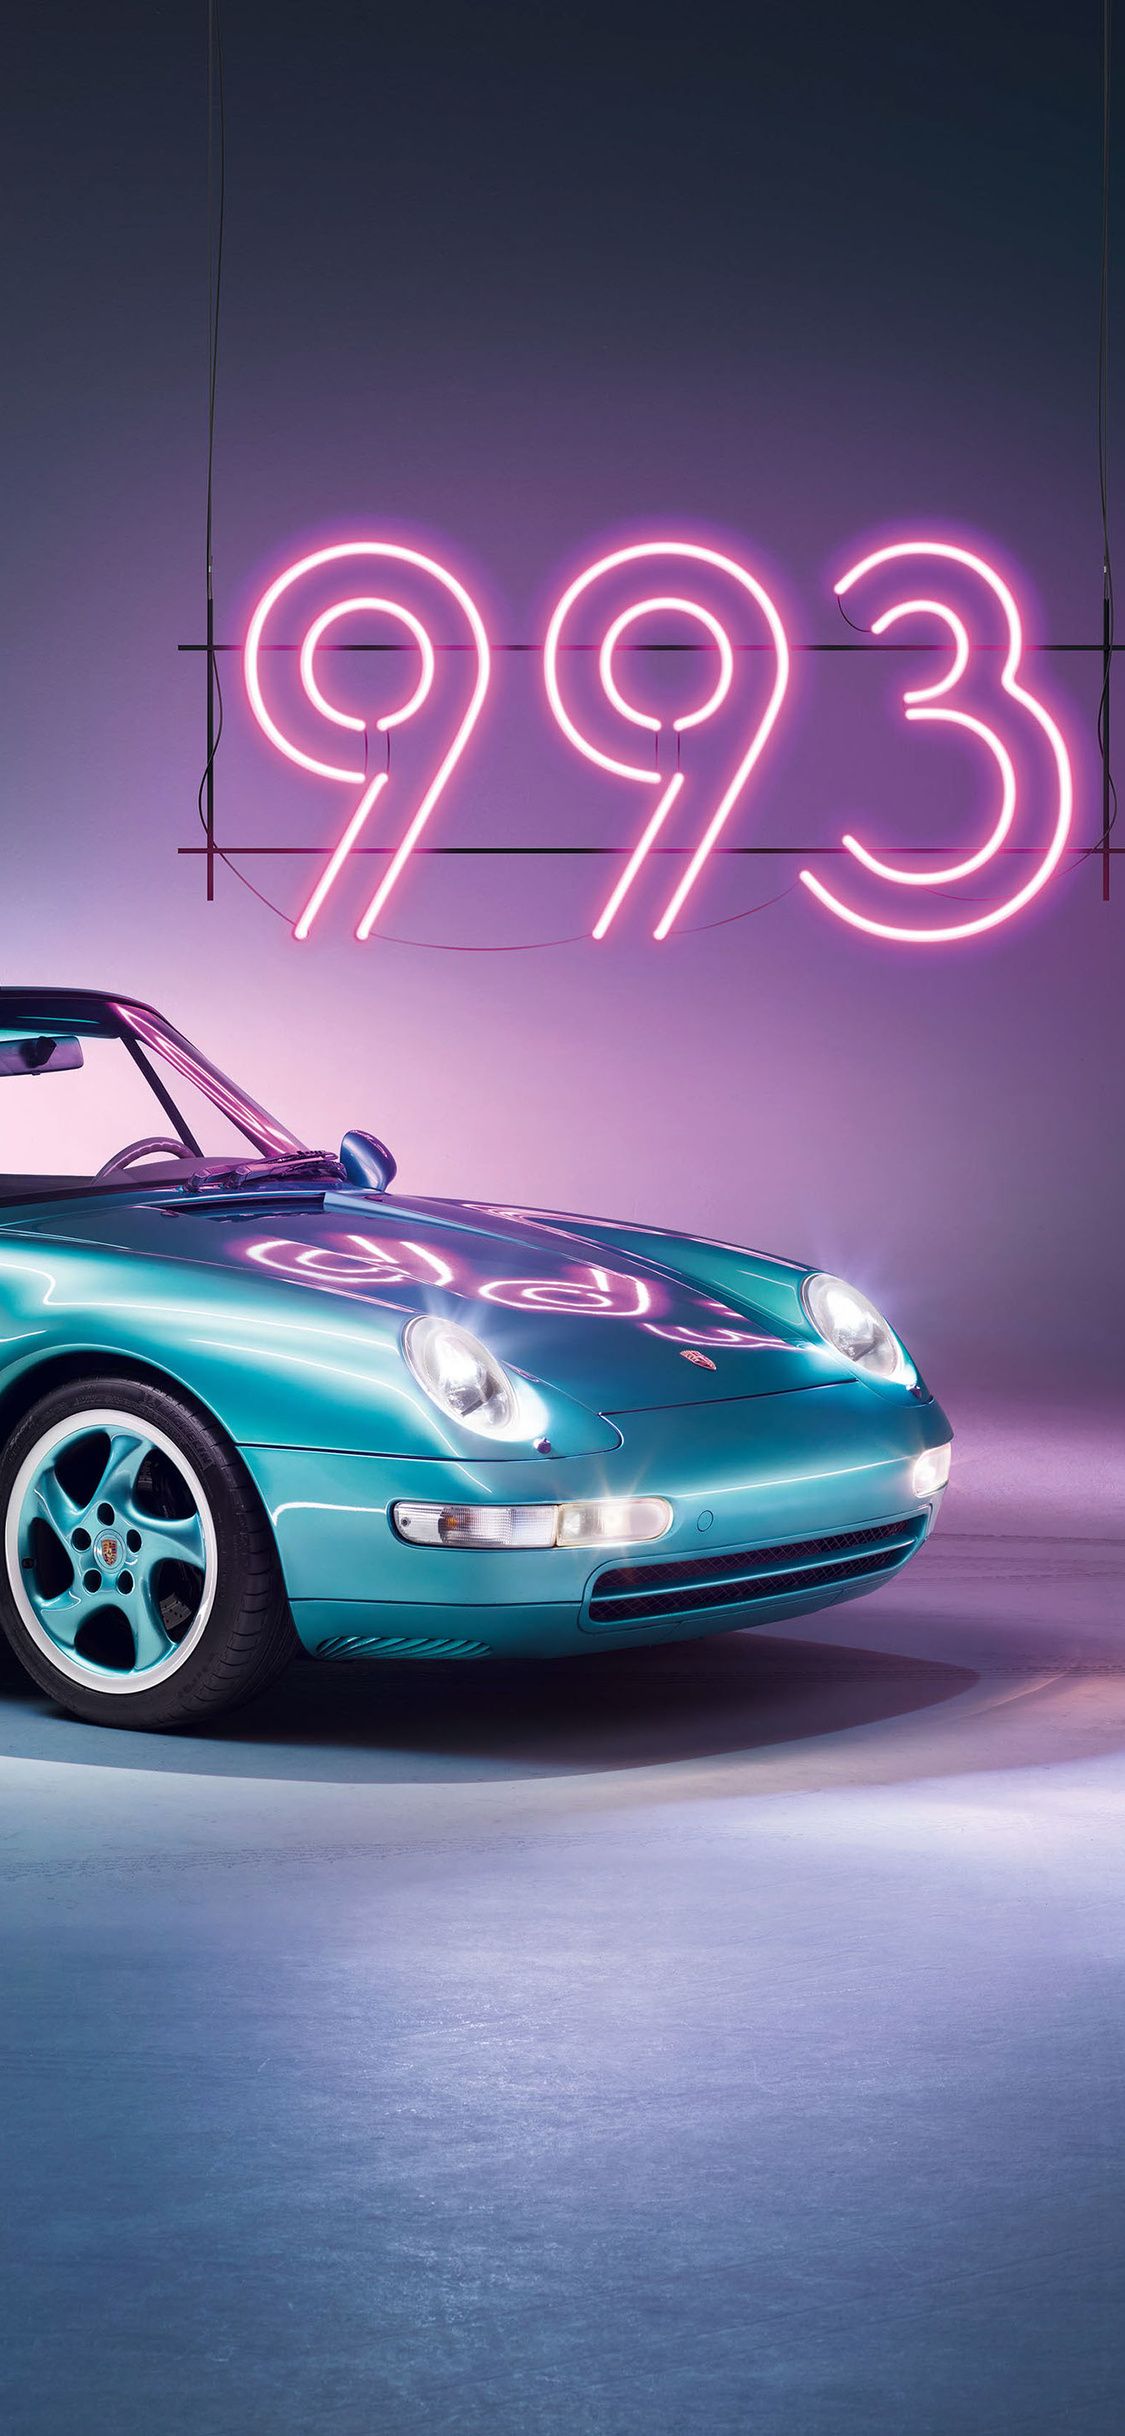 Porsche 993 4k iPhone XS, iPhone iPhone X HD 4k Wallpaper, Image, Background, Photo and Picture